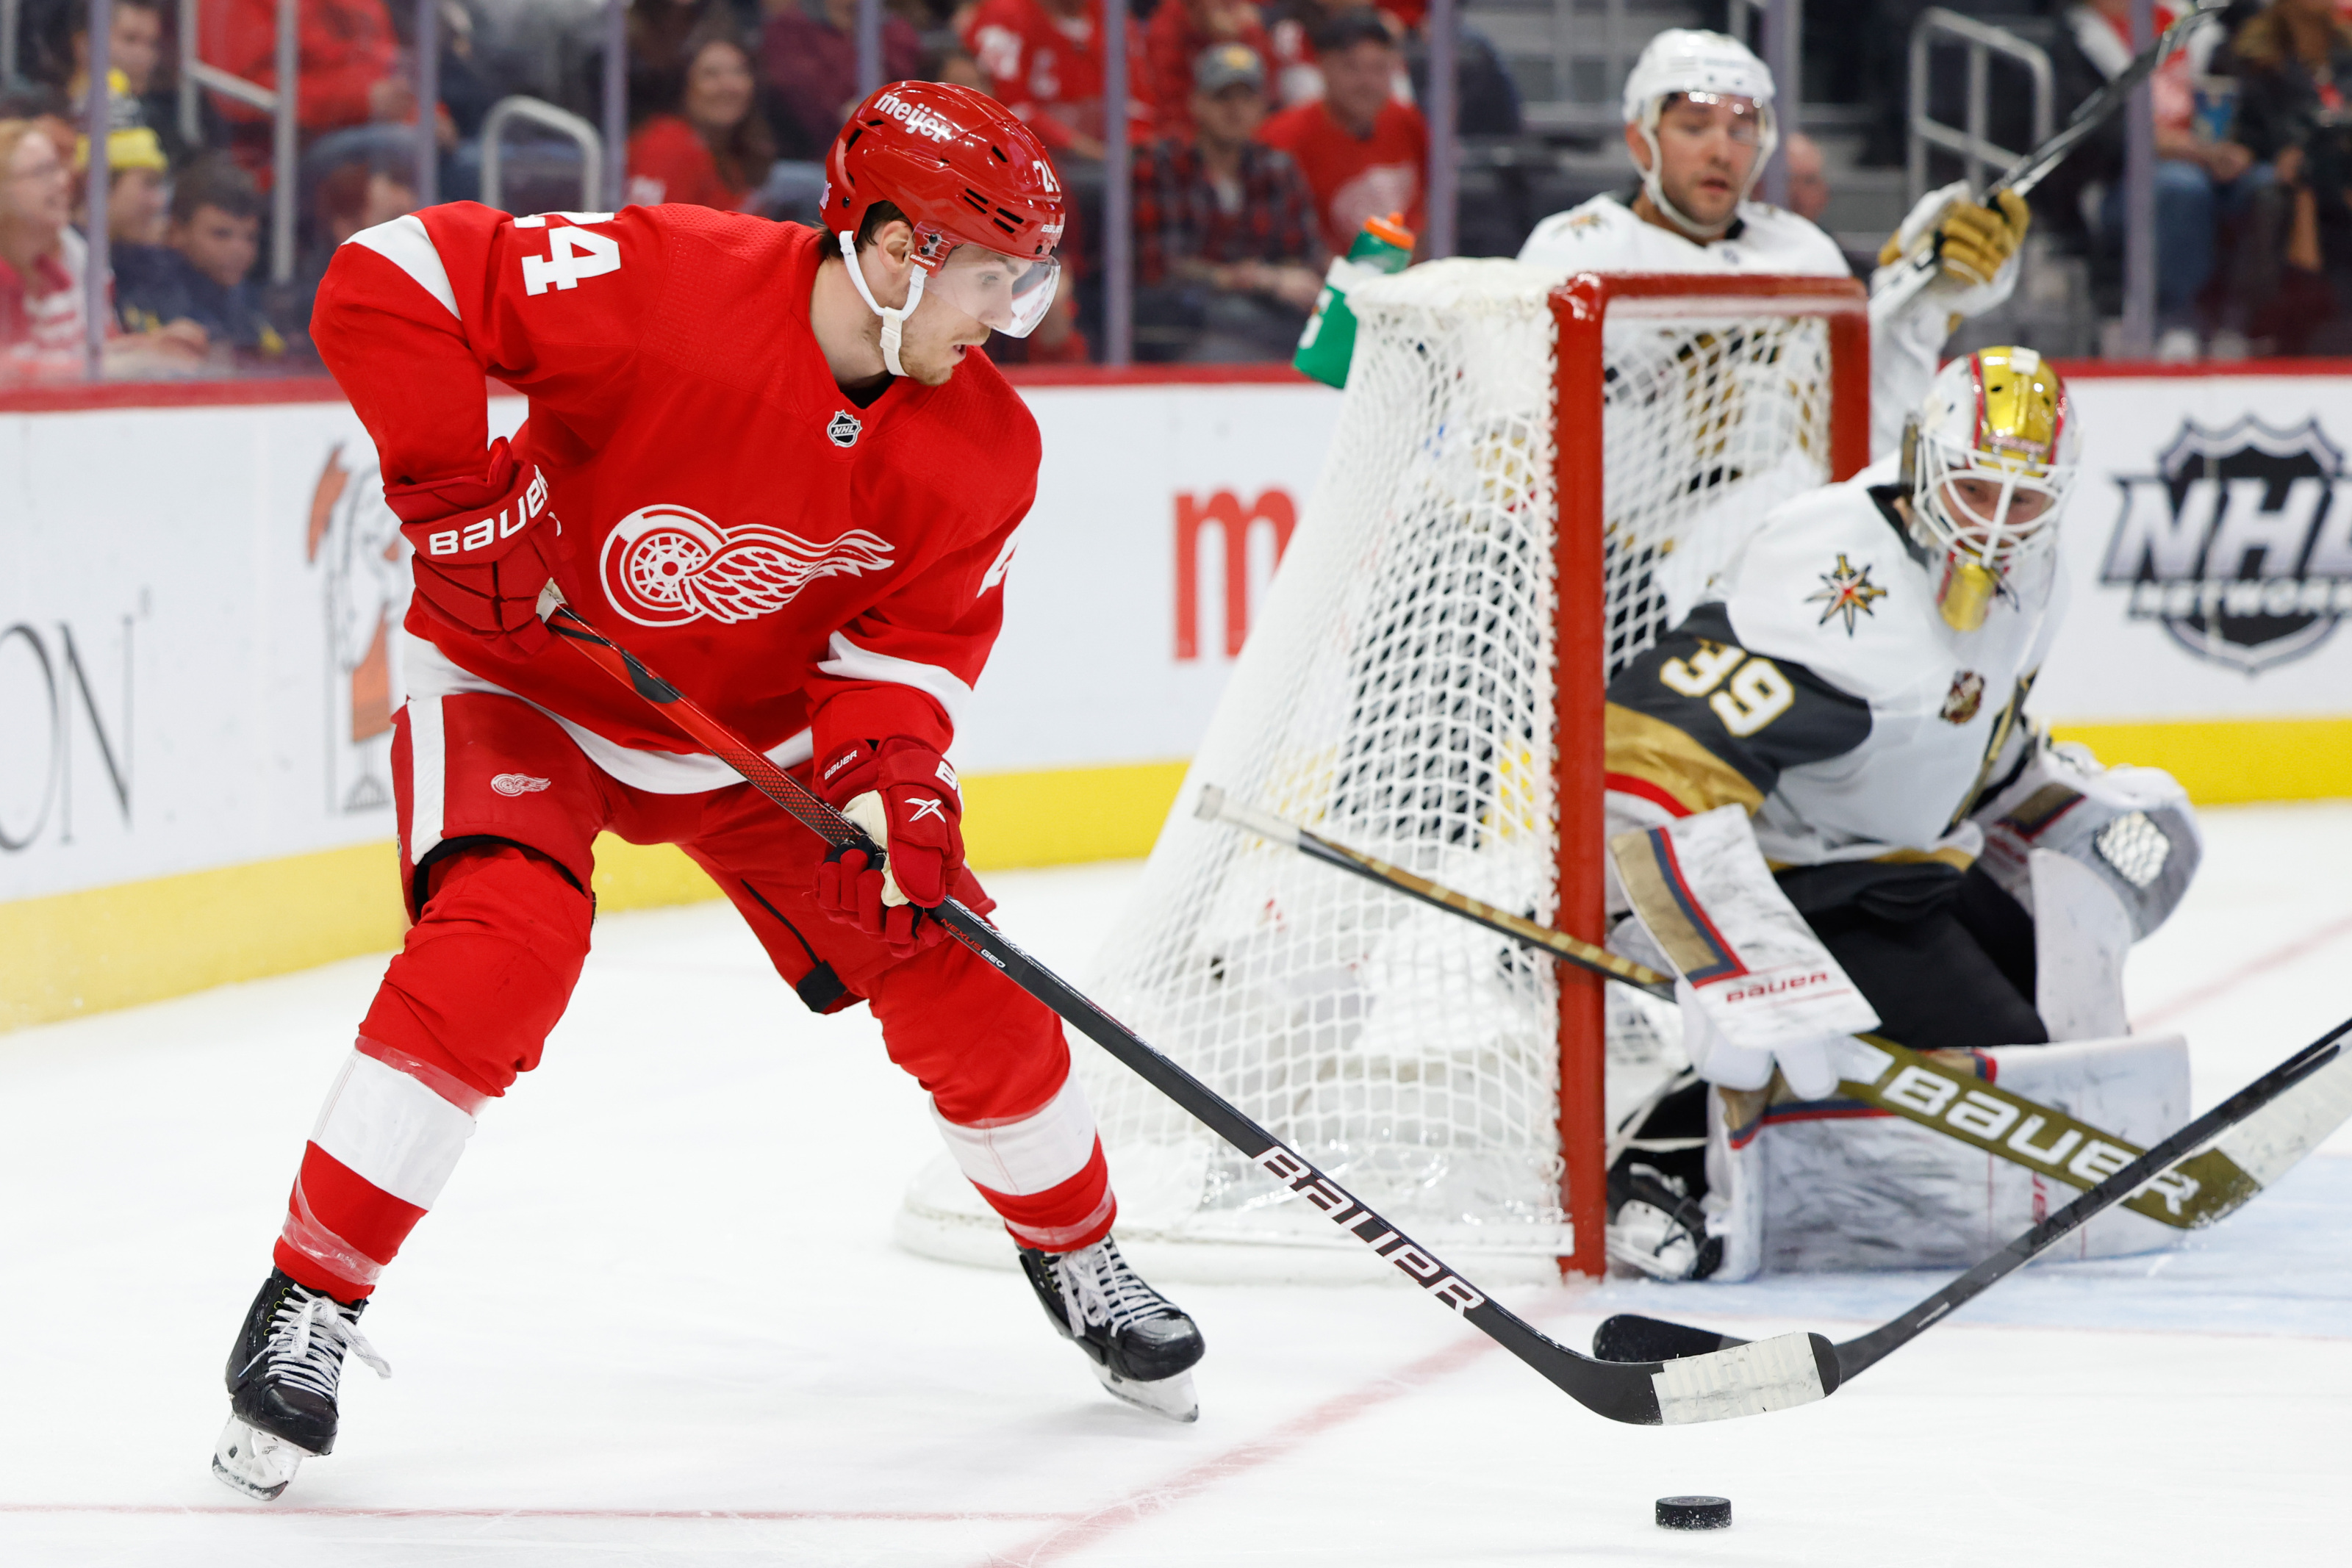 Pius Suter has opportunity to grow with Detroit Red Wings rebuild